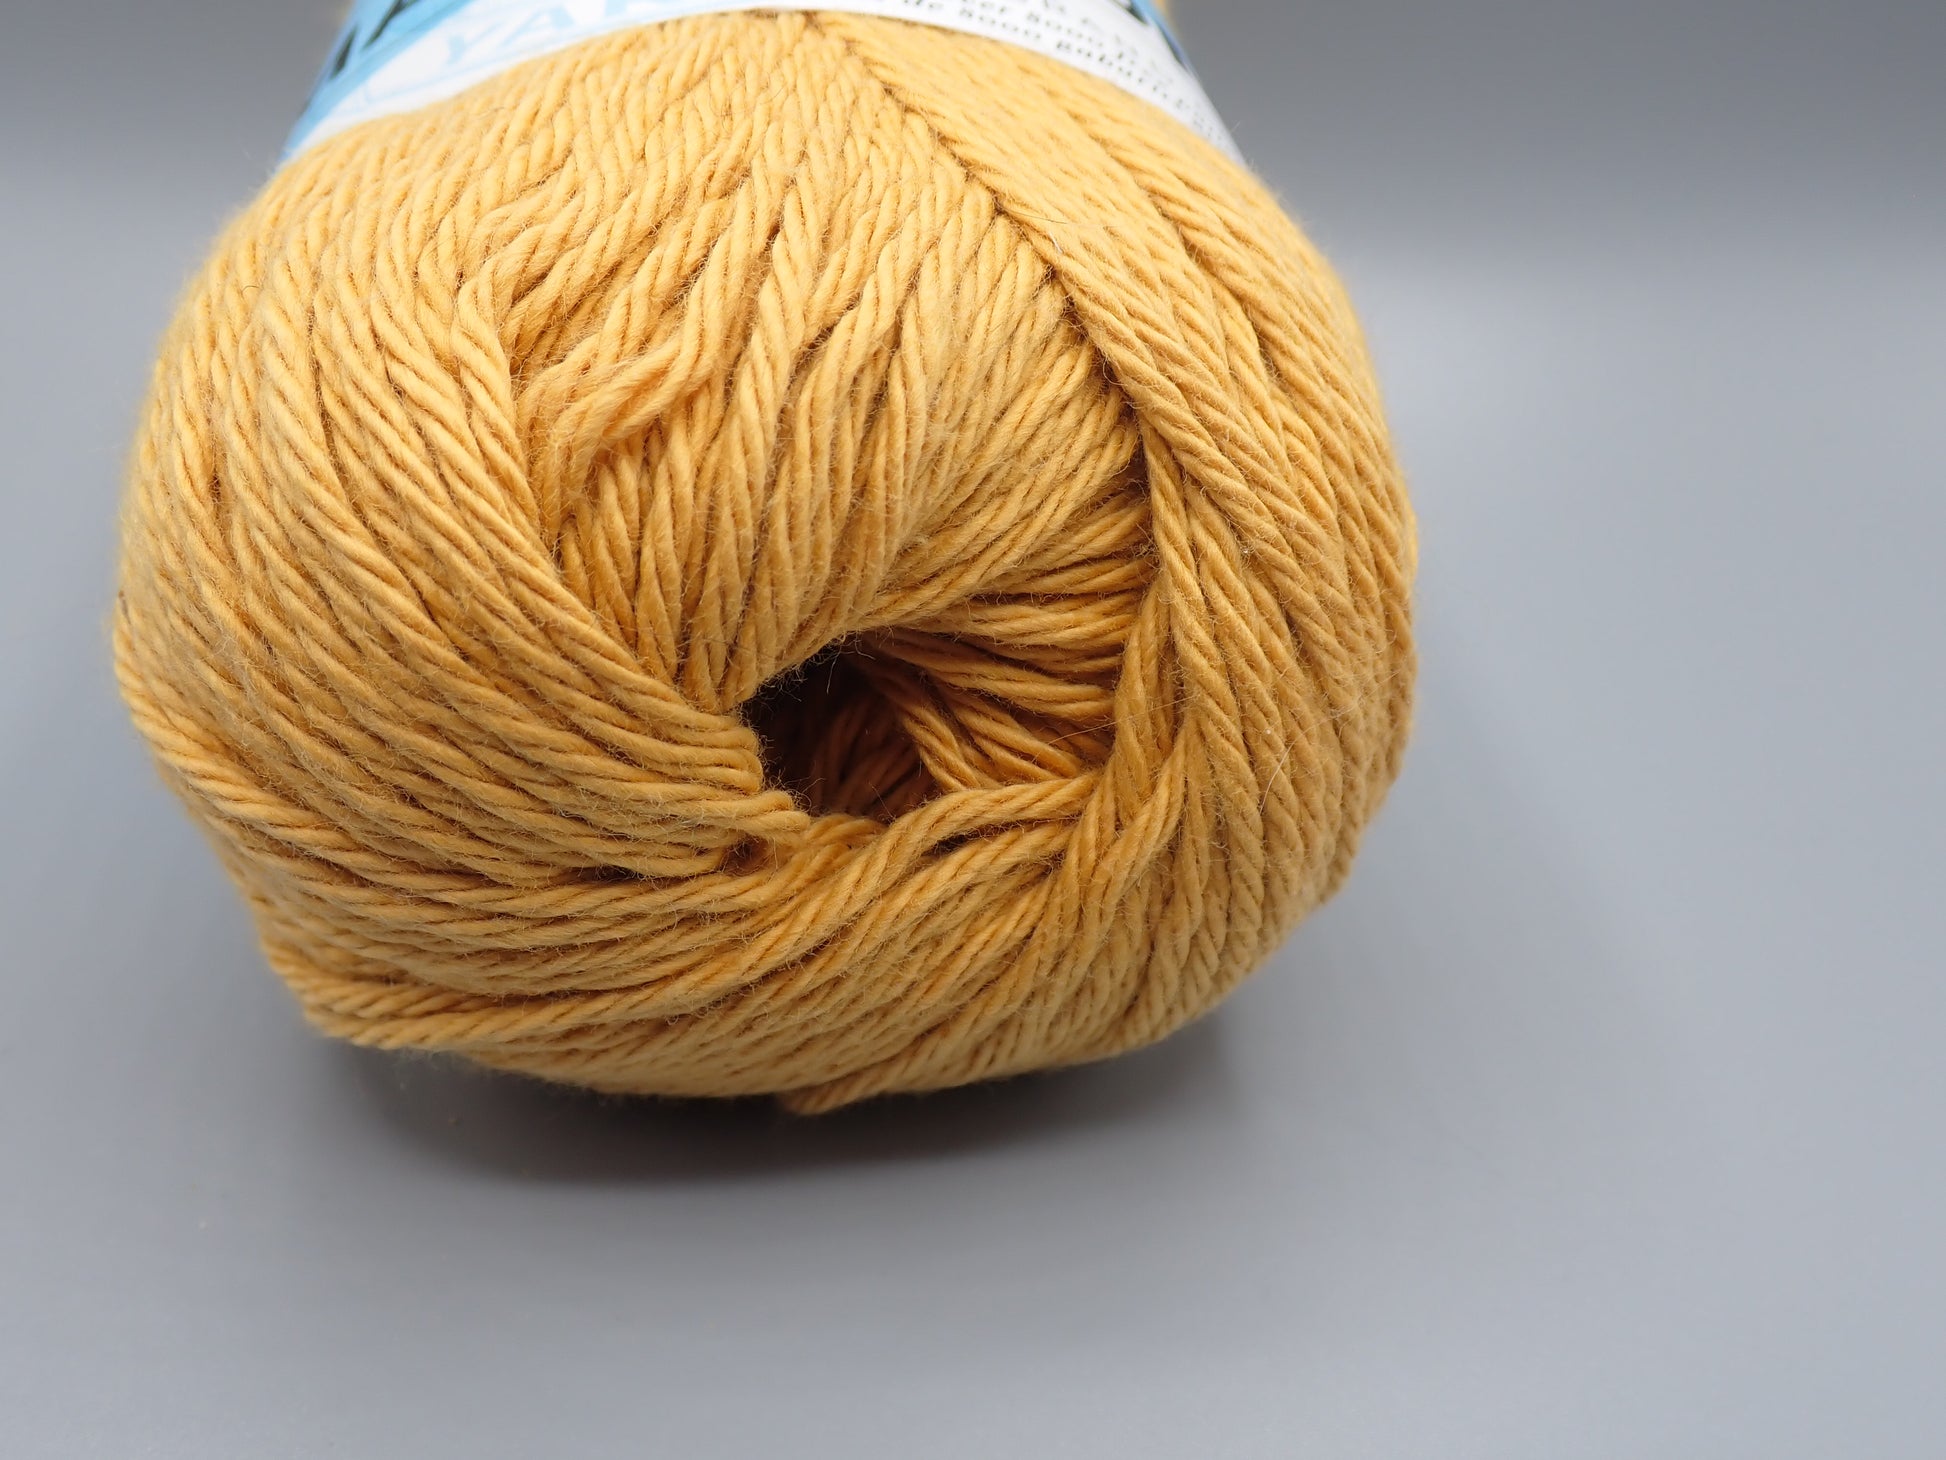 Lion Brand Yarns Worsted weight 24/7 Cotton Yarn Navy – Sweetwater Yarns